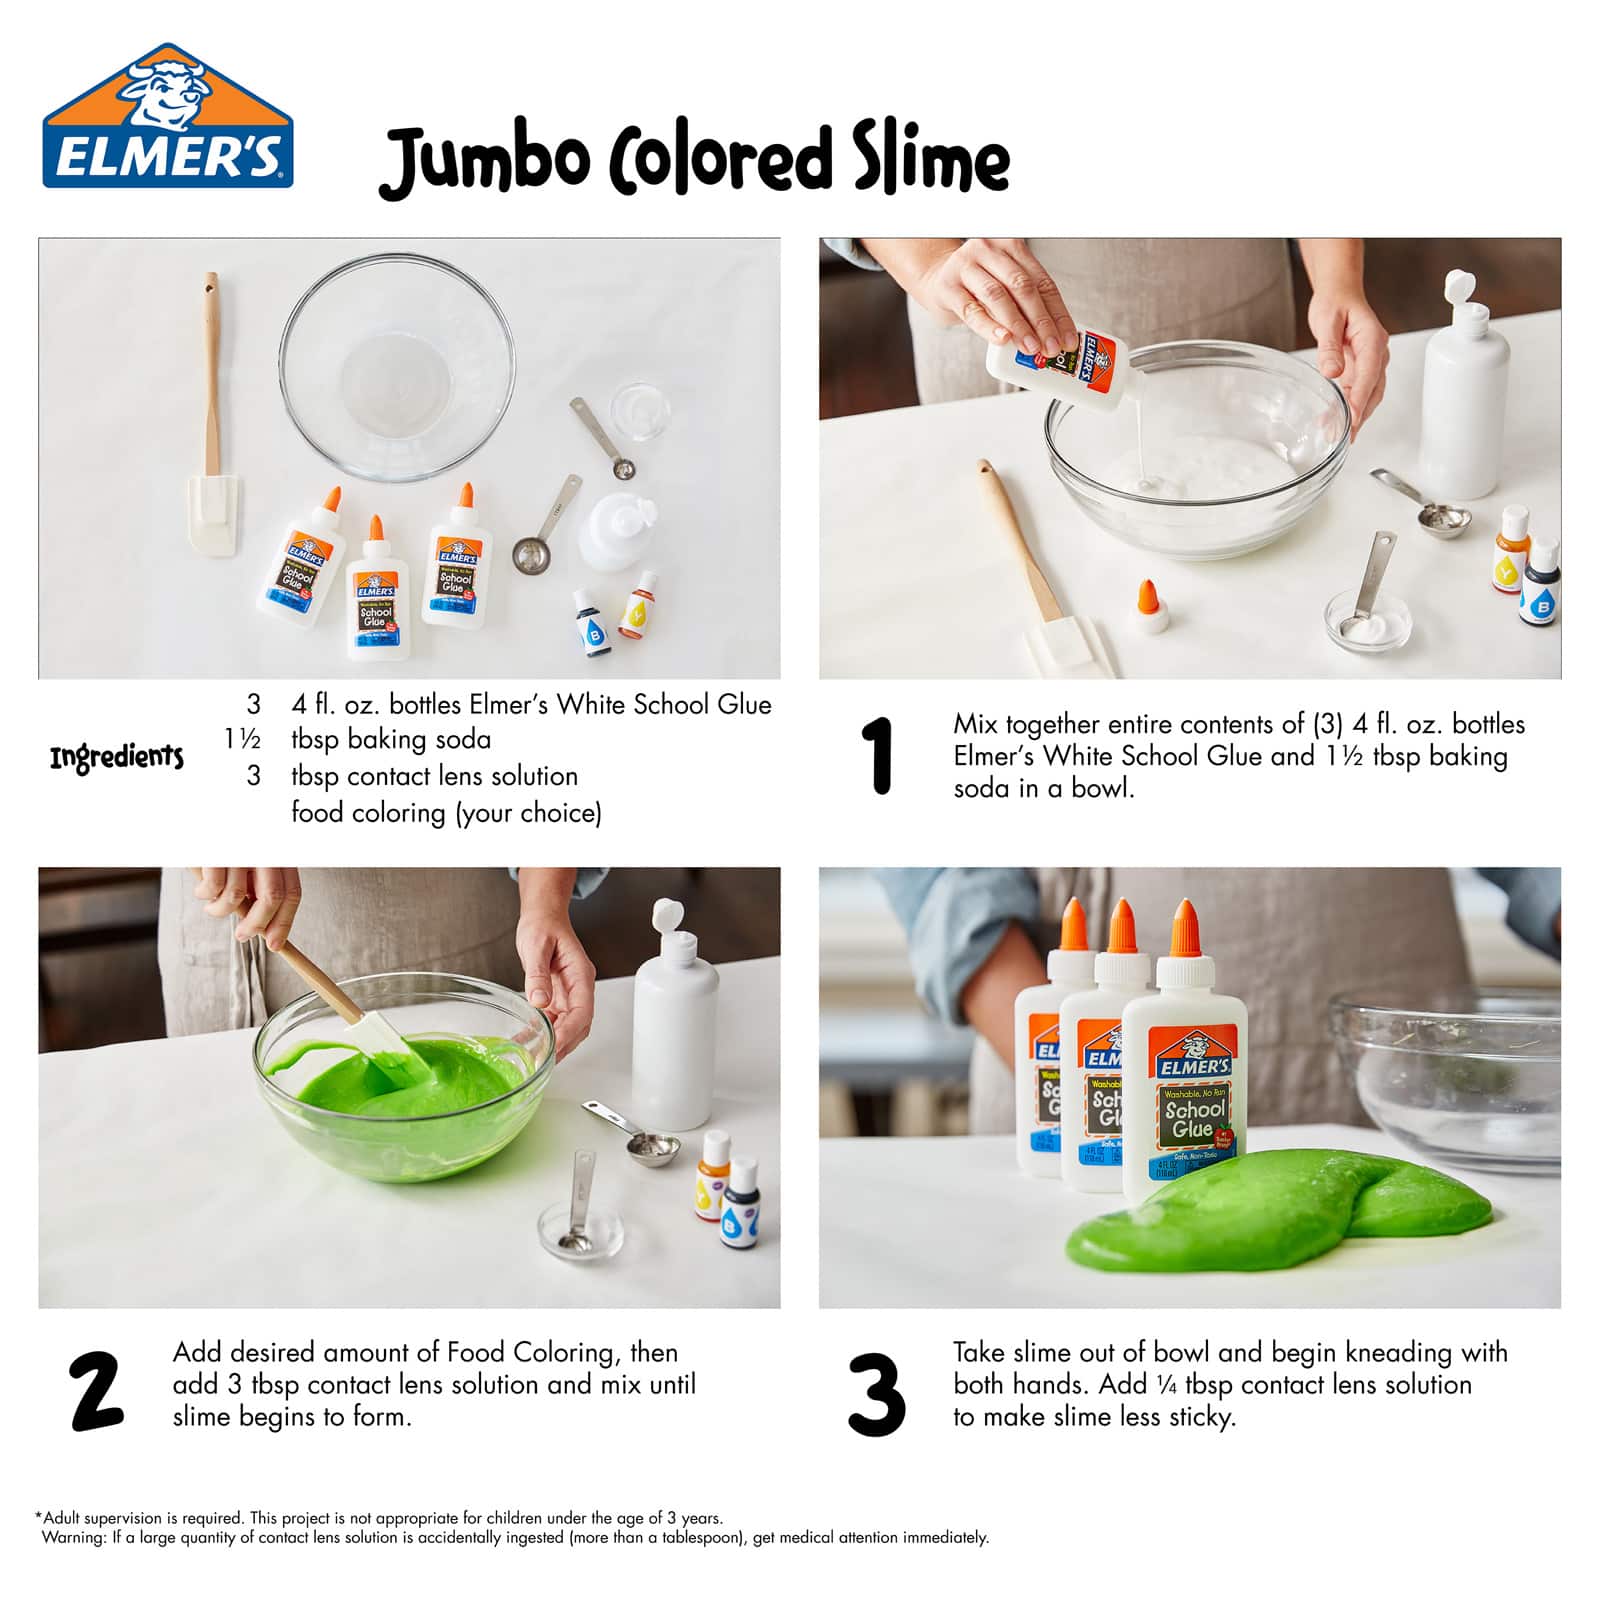 Elmer's Glue Teaching Tool Kit - Kids Learning The World Around Them  (Review + Giveaway) - Mama to 6 Blessings